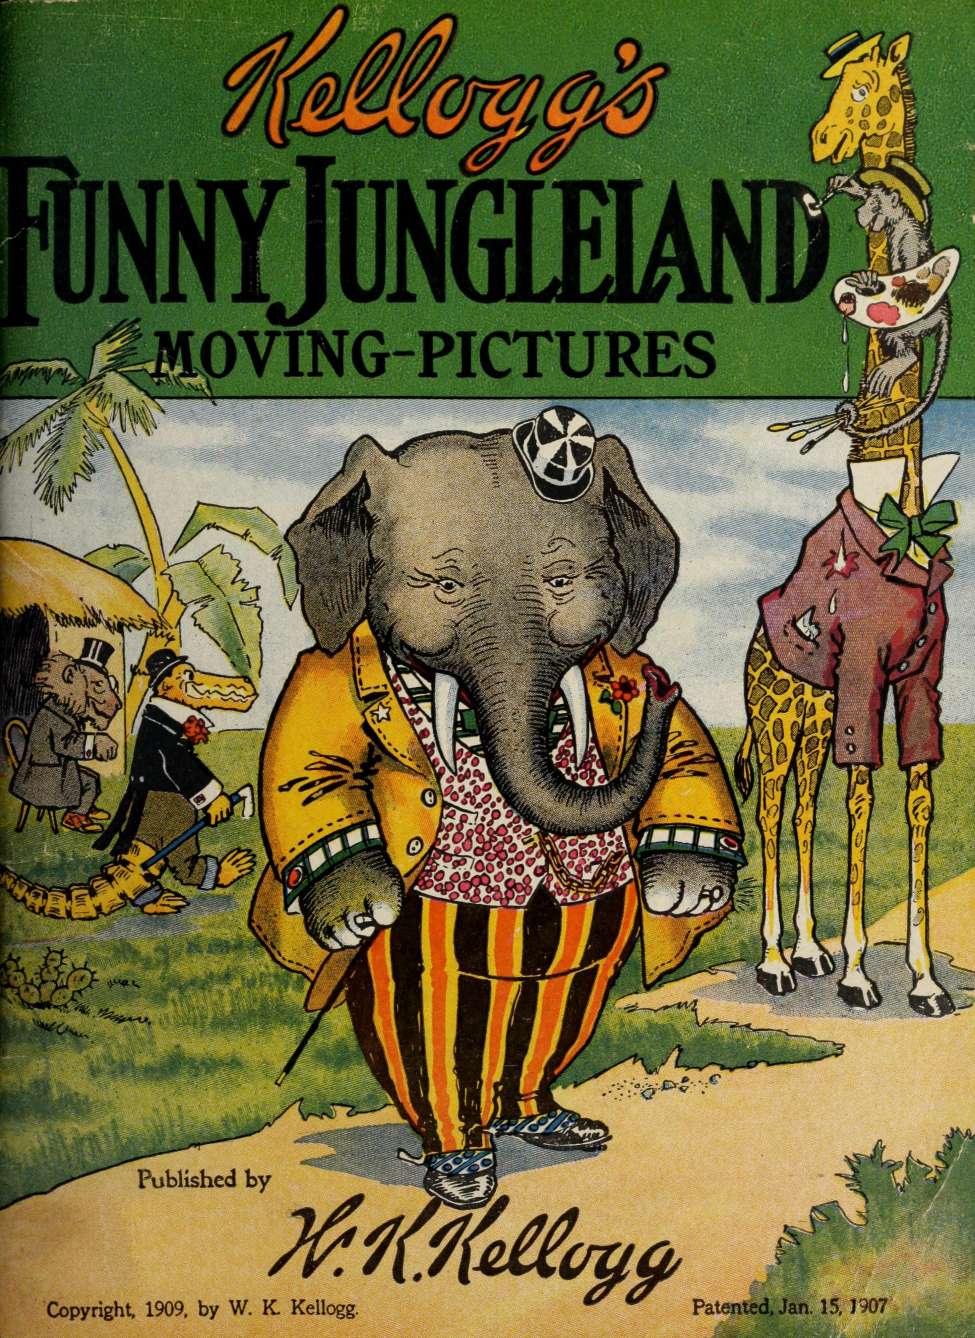 Book Cover For Kellogg's Funny Jungleland Moving-Pictures